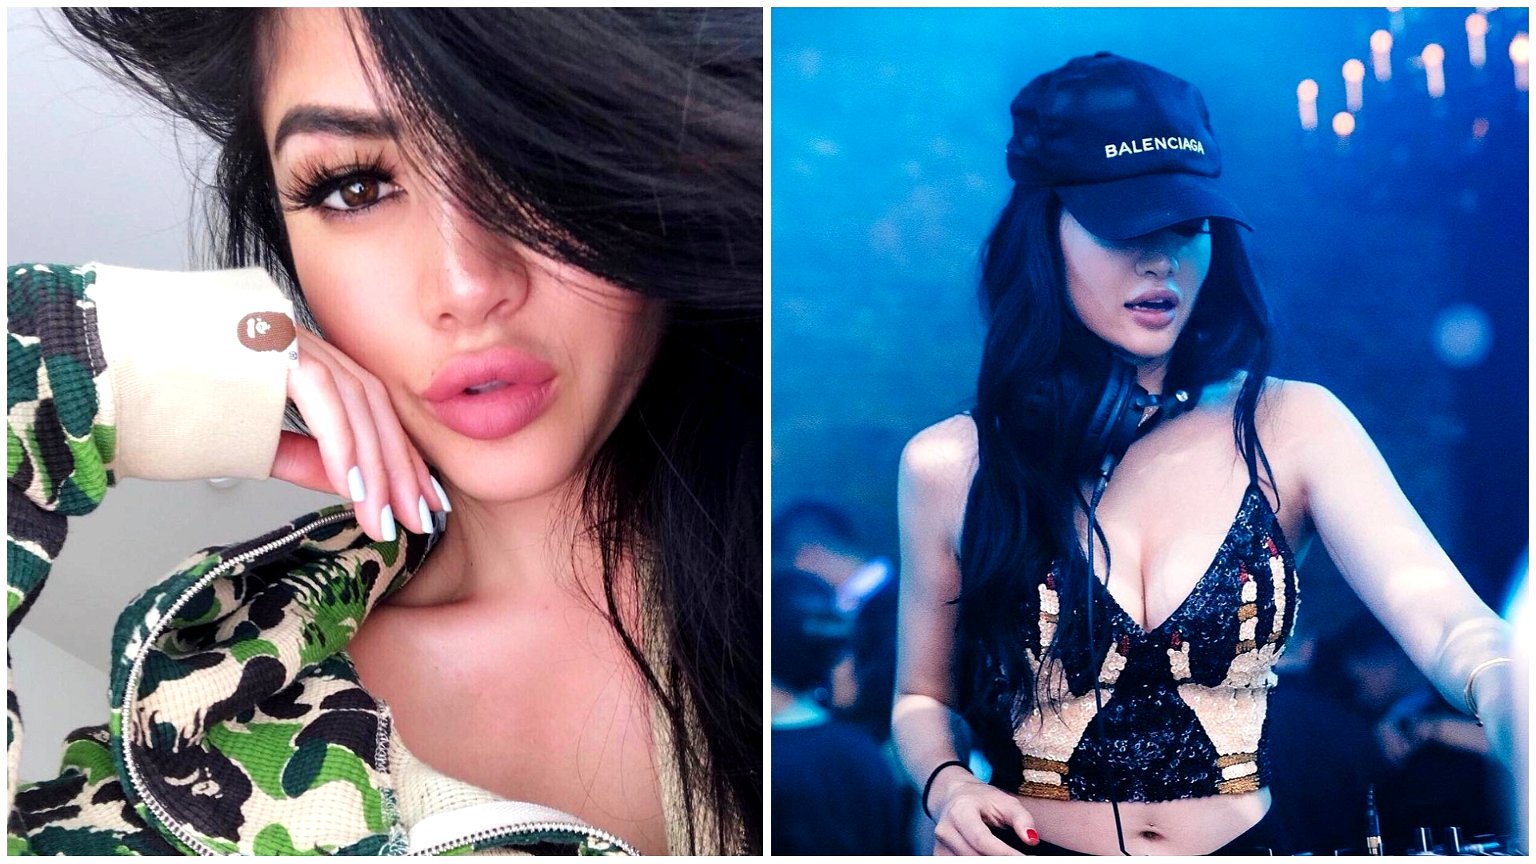 She Made it Big as an International Model, Now She’s Proving She Can Succeed As a Female DJ